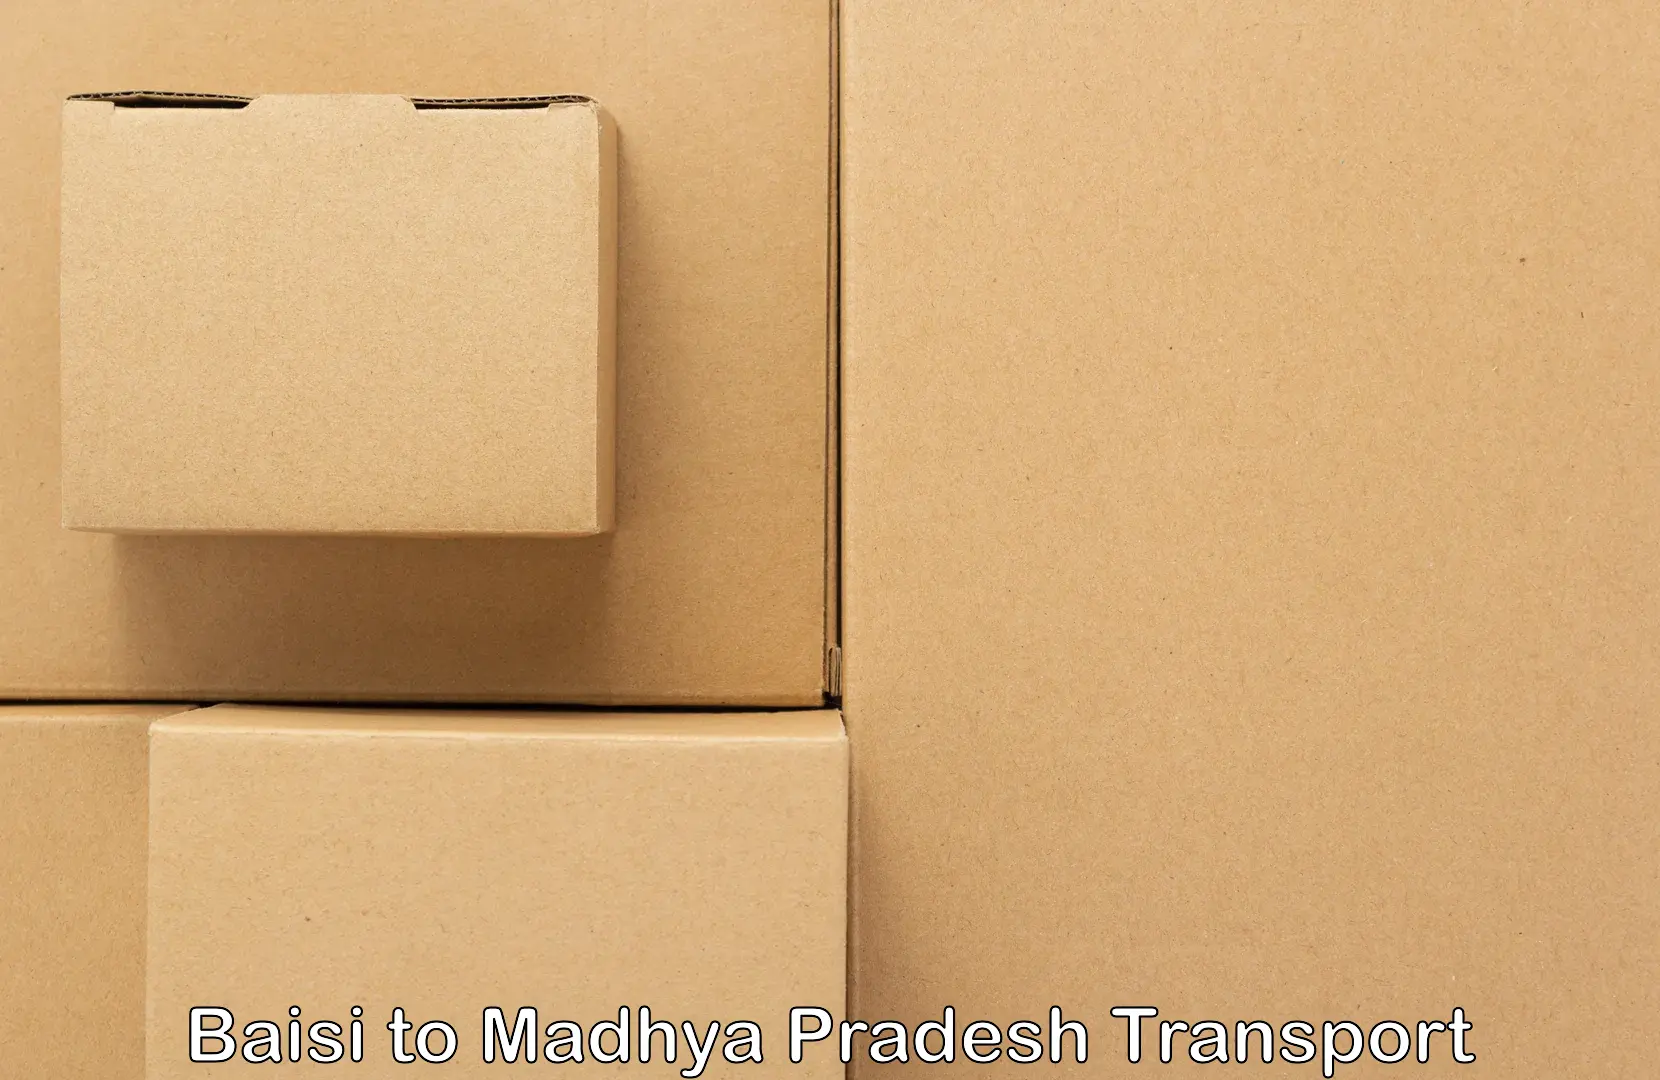 Two wheeler parcel service Baisi to Gwalior